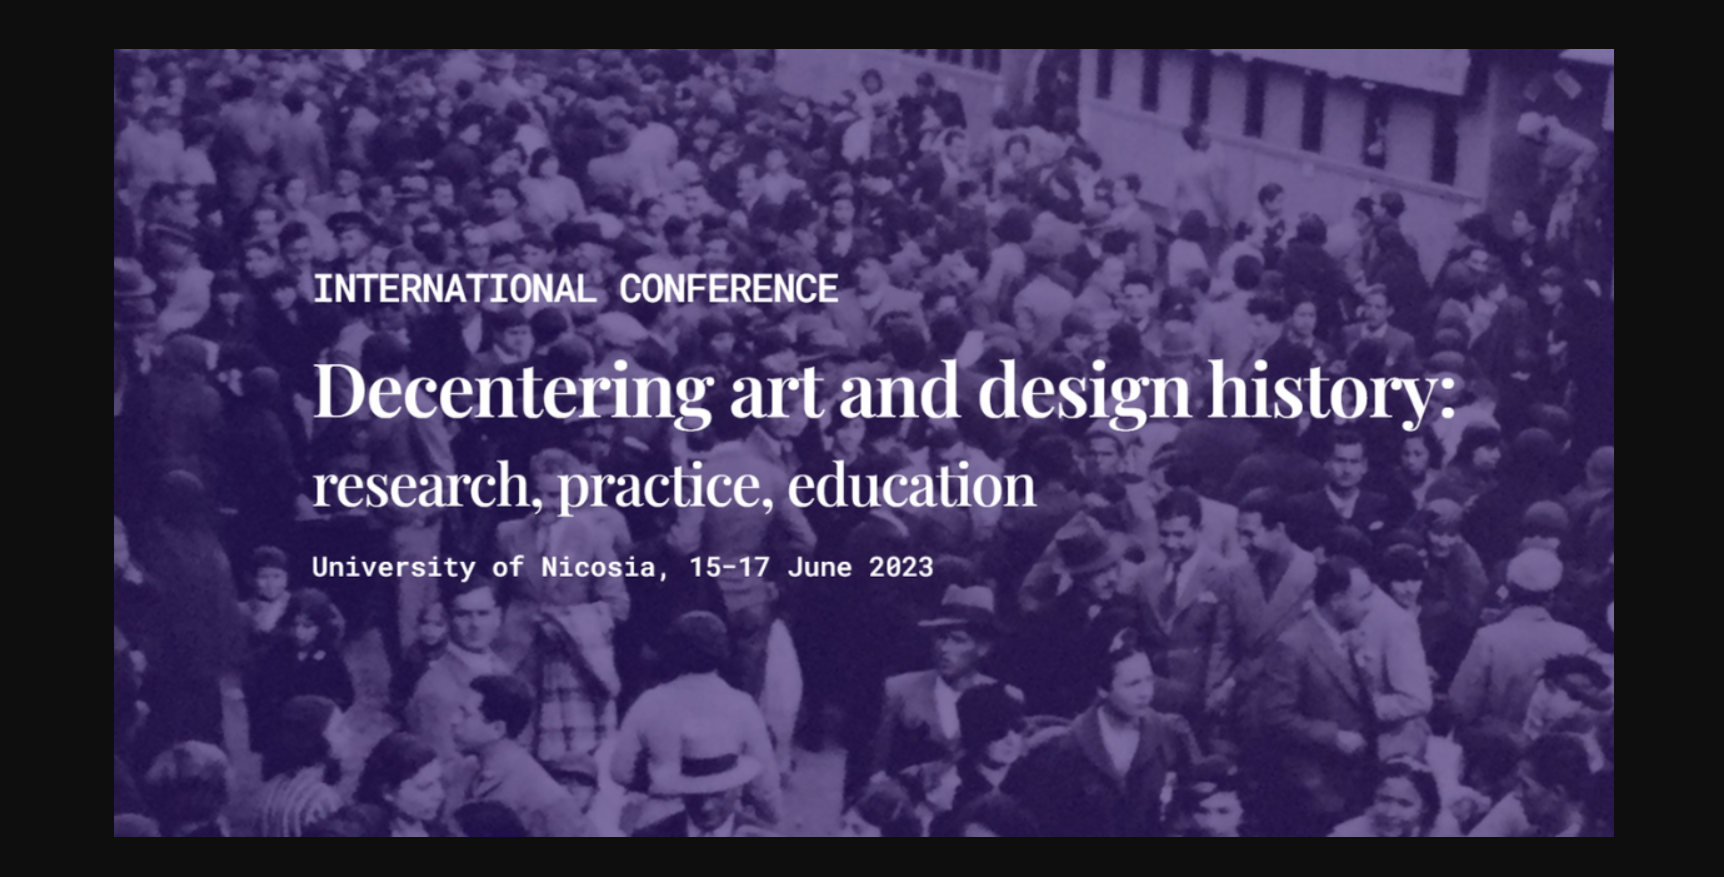 DADH 2023 INTERNATIONAL CONFERENCE Decentering art and design history: research, practice, education